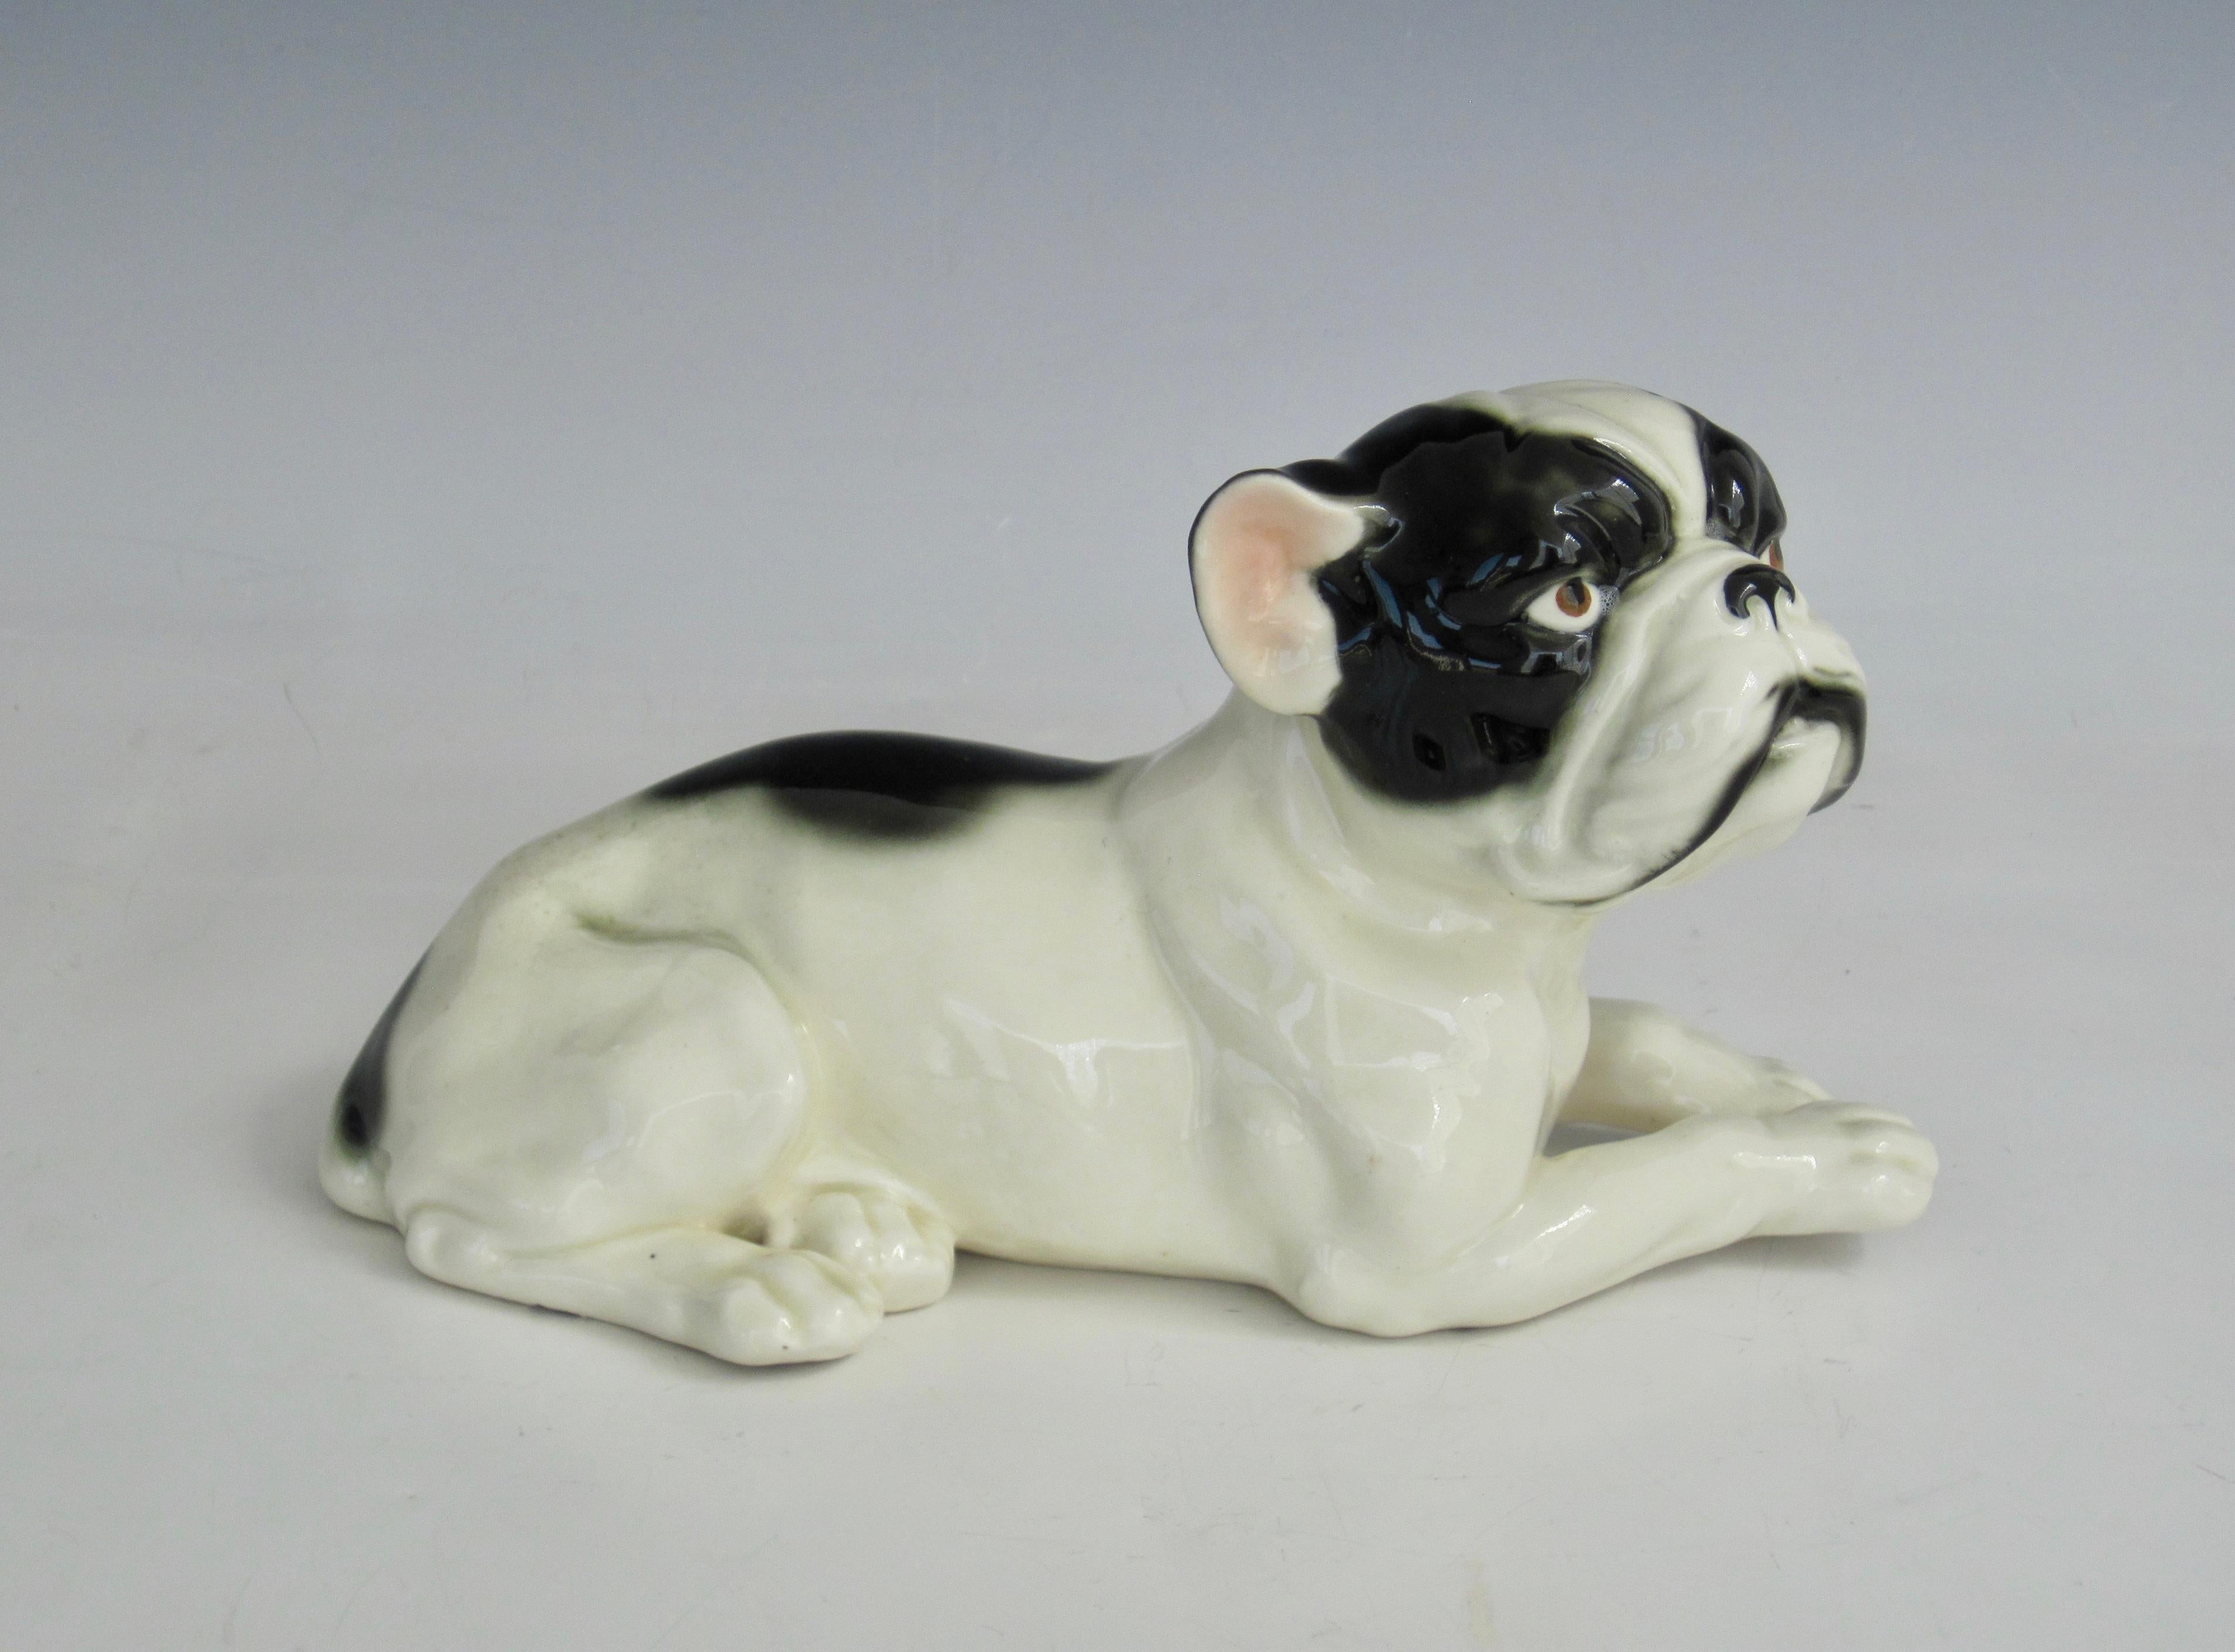 Black and white porcelain French Bulldog sculpture from the Art Deco period. This Frenchie was finely crafted and has loads of charm and details and a good size for decor. Numbered on the underside. No makers mark. Good condition without chips or